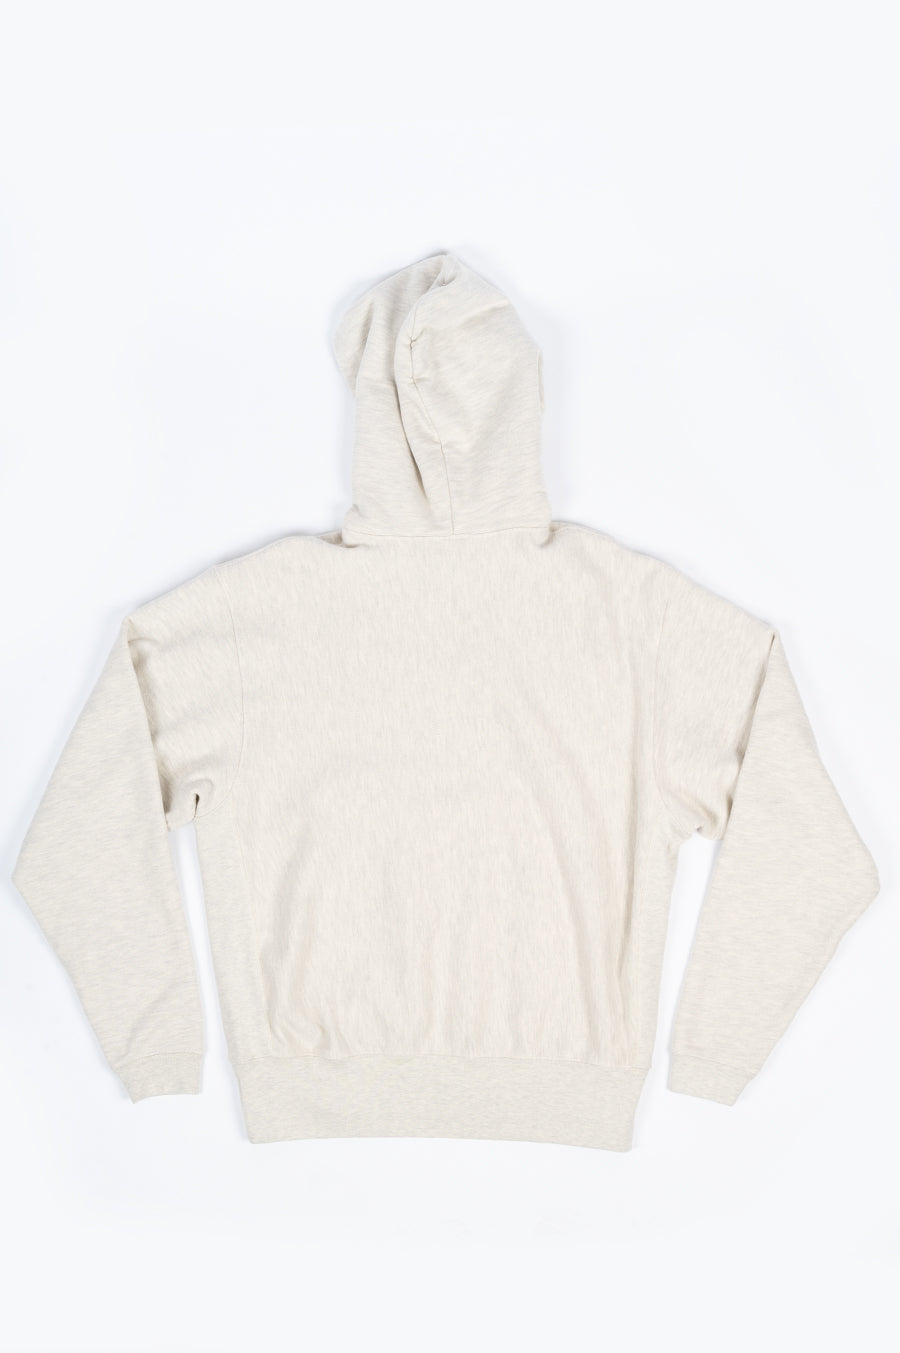 HOUSE OF PAA PARKA HOODED PULLOVER SWEATSHIRT OAT